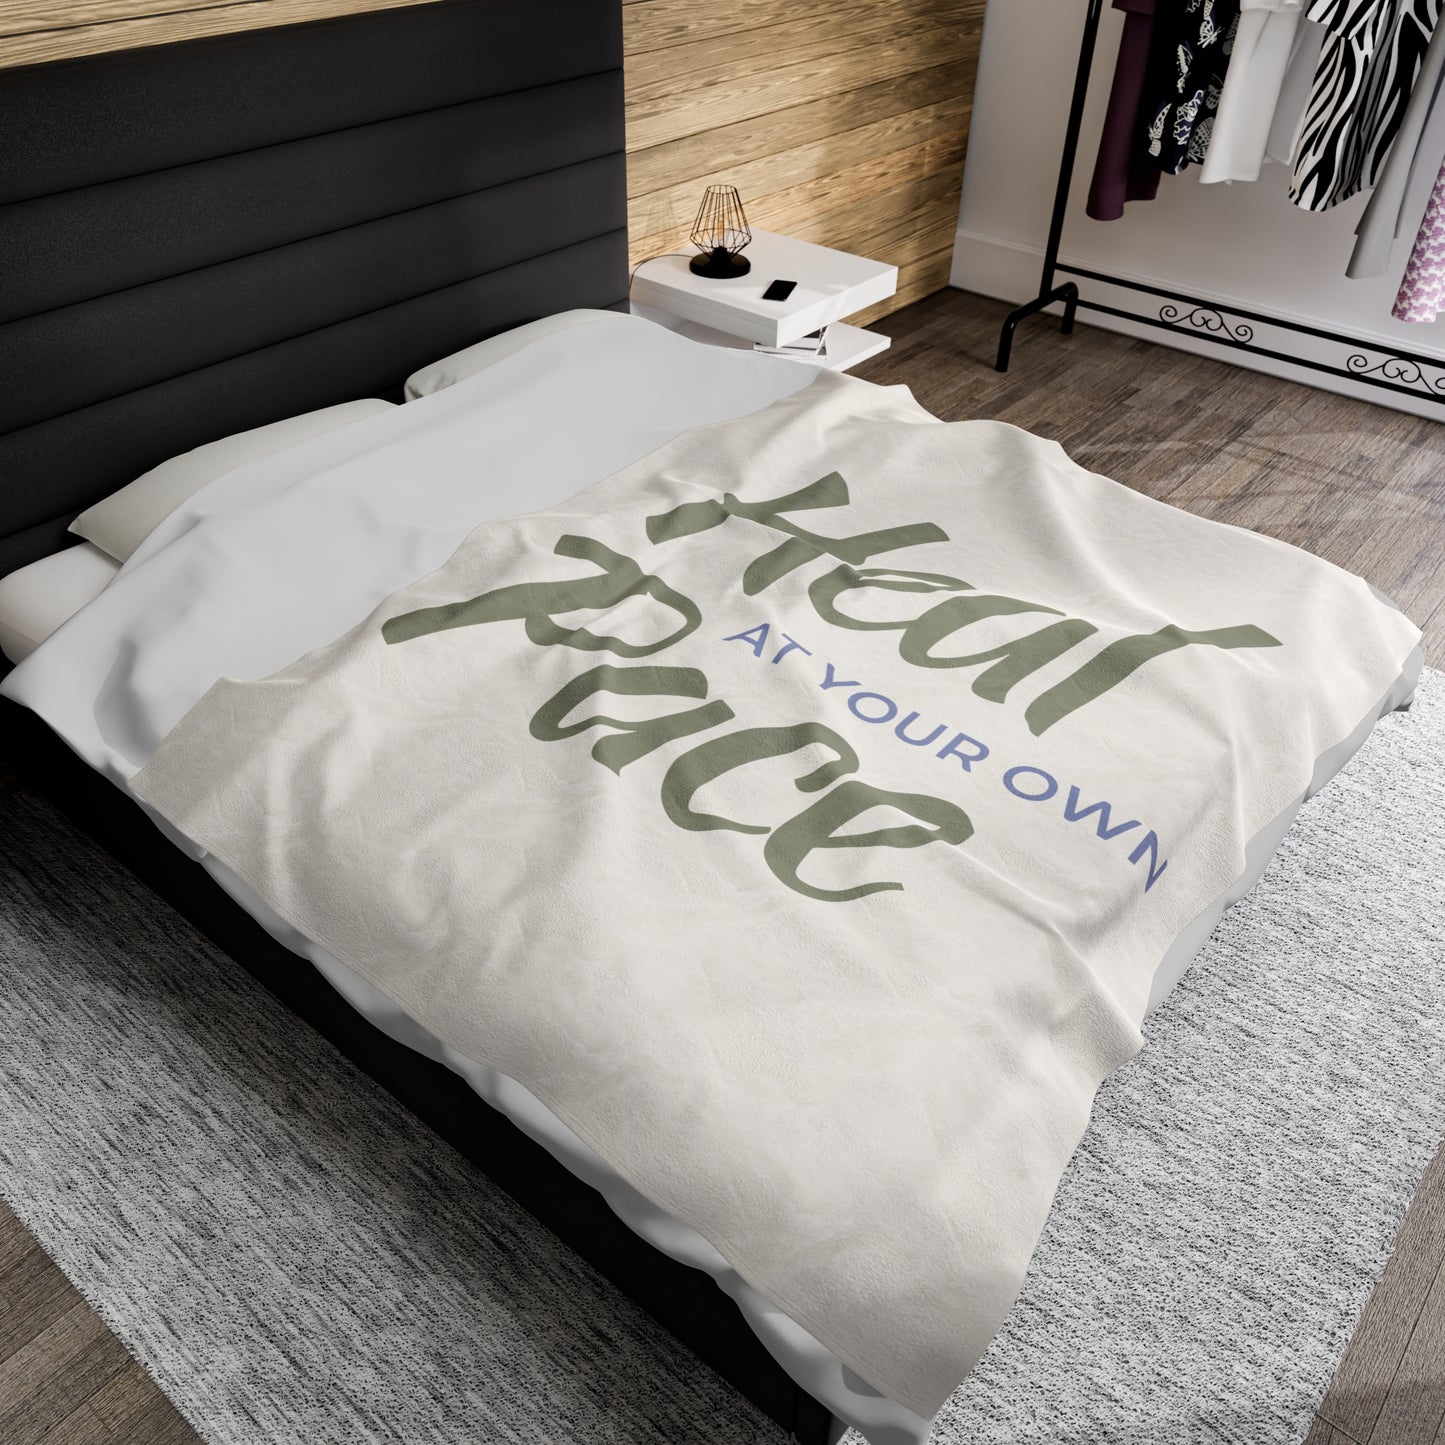 Heal at Your Own Pace Plush Blanket